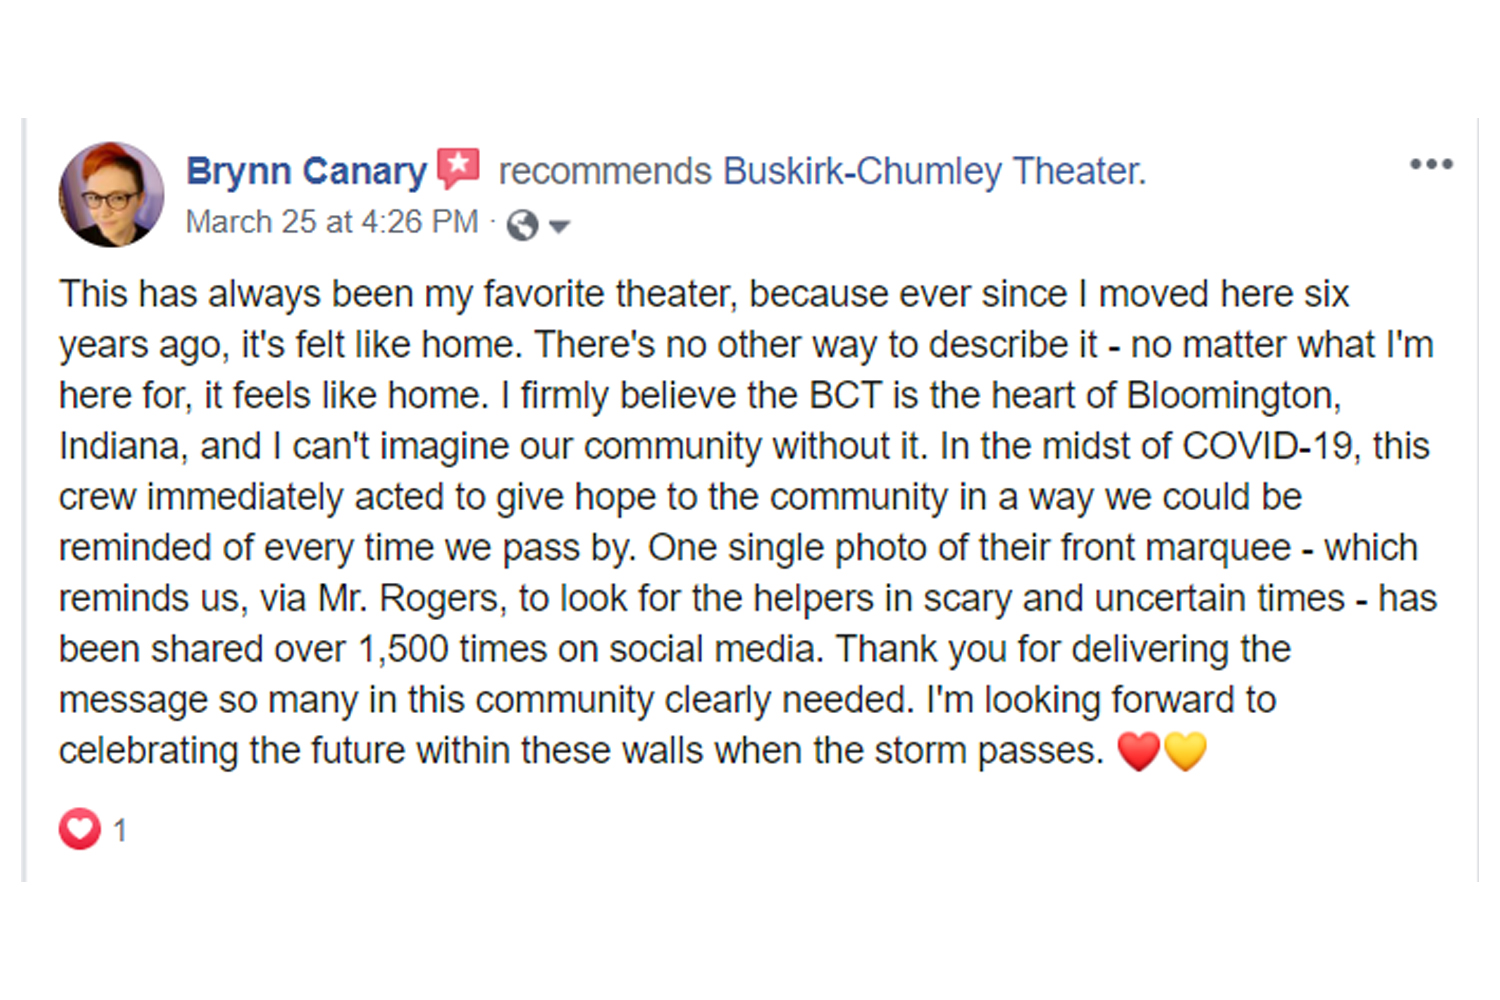 A screenshot of a review Brynn Canary left for the Buskirk-Chumley Theatre on their Facebook page.